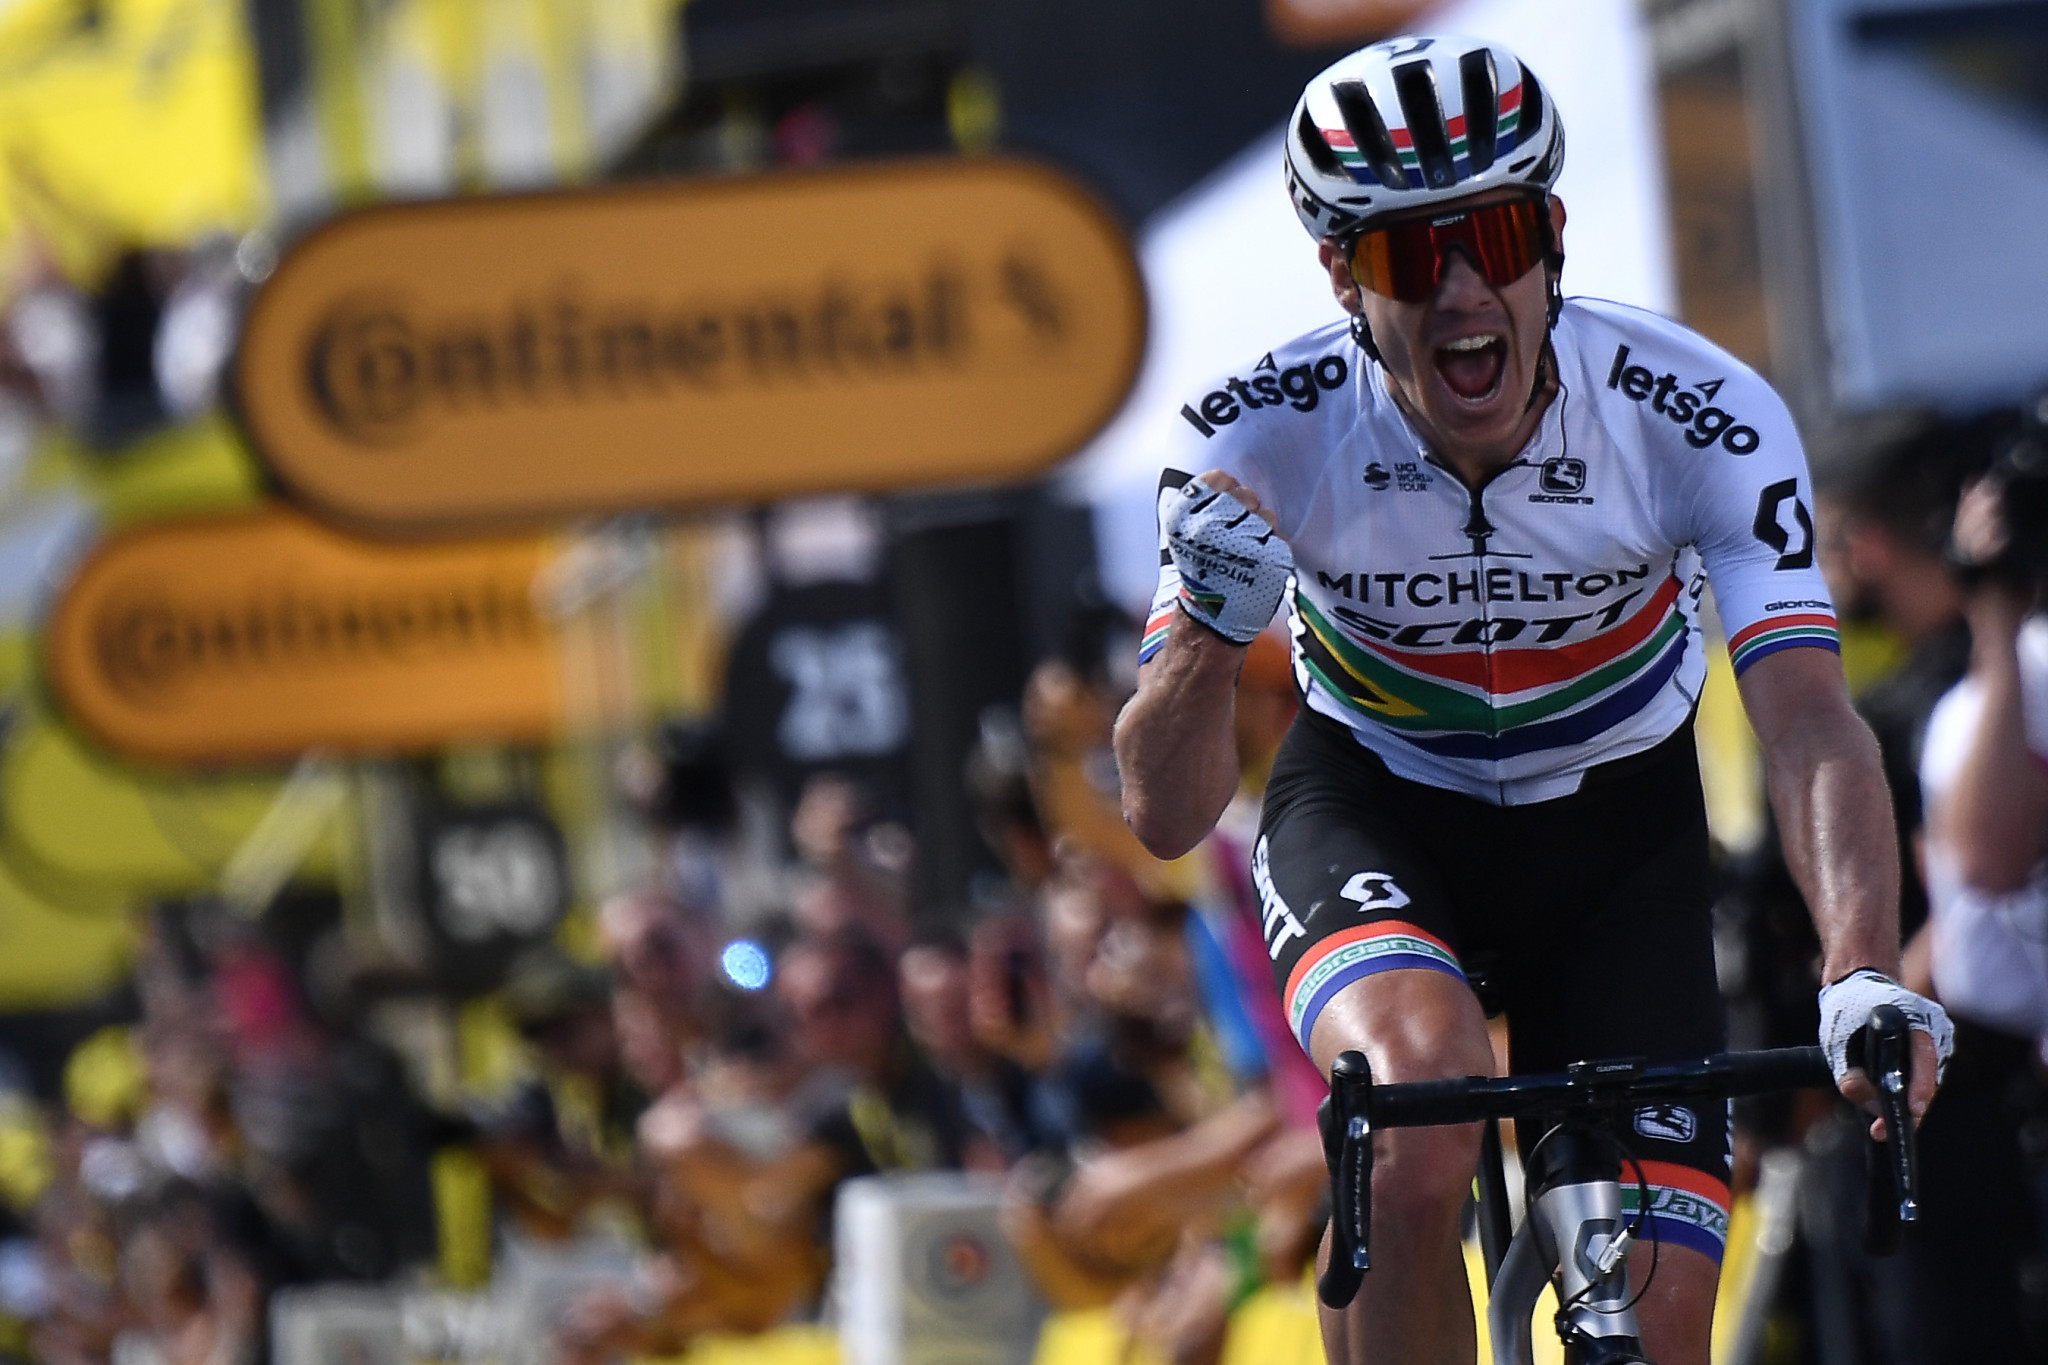  South African Impey takes Tour de France stage nine as Alaphilippe keeps overall lead